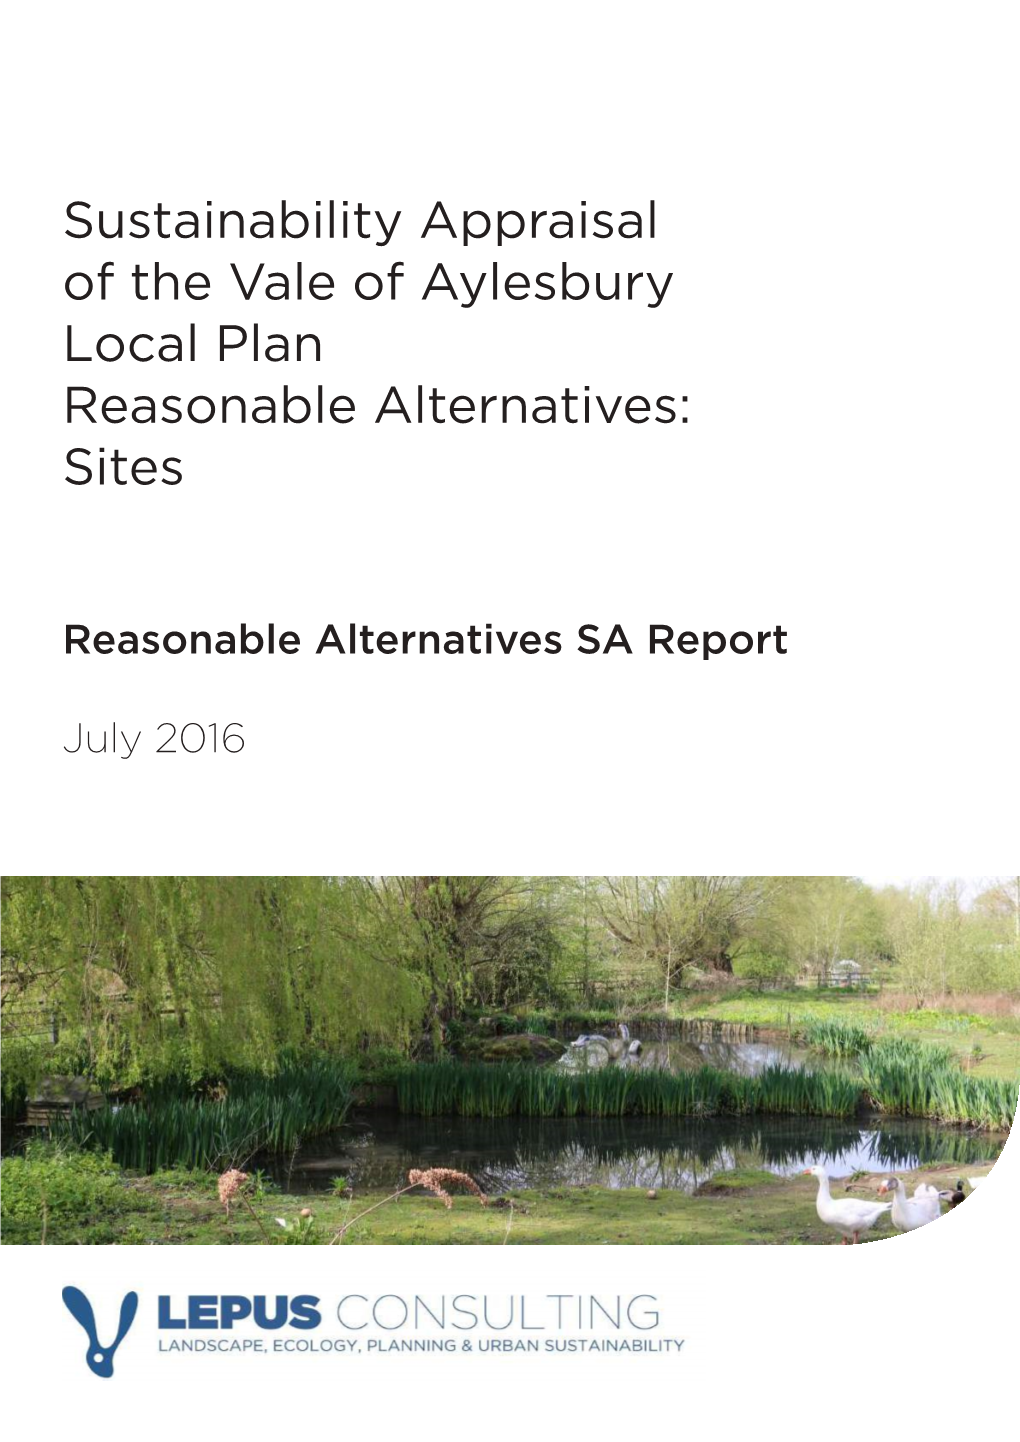 Sustainability Appraisal of the Vale of Aylesbury Local Plan Reasonable Alternatives: Sites